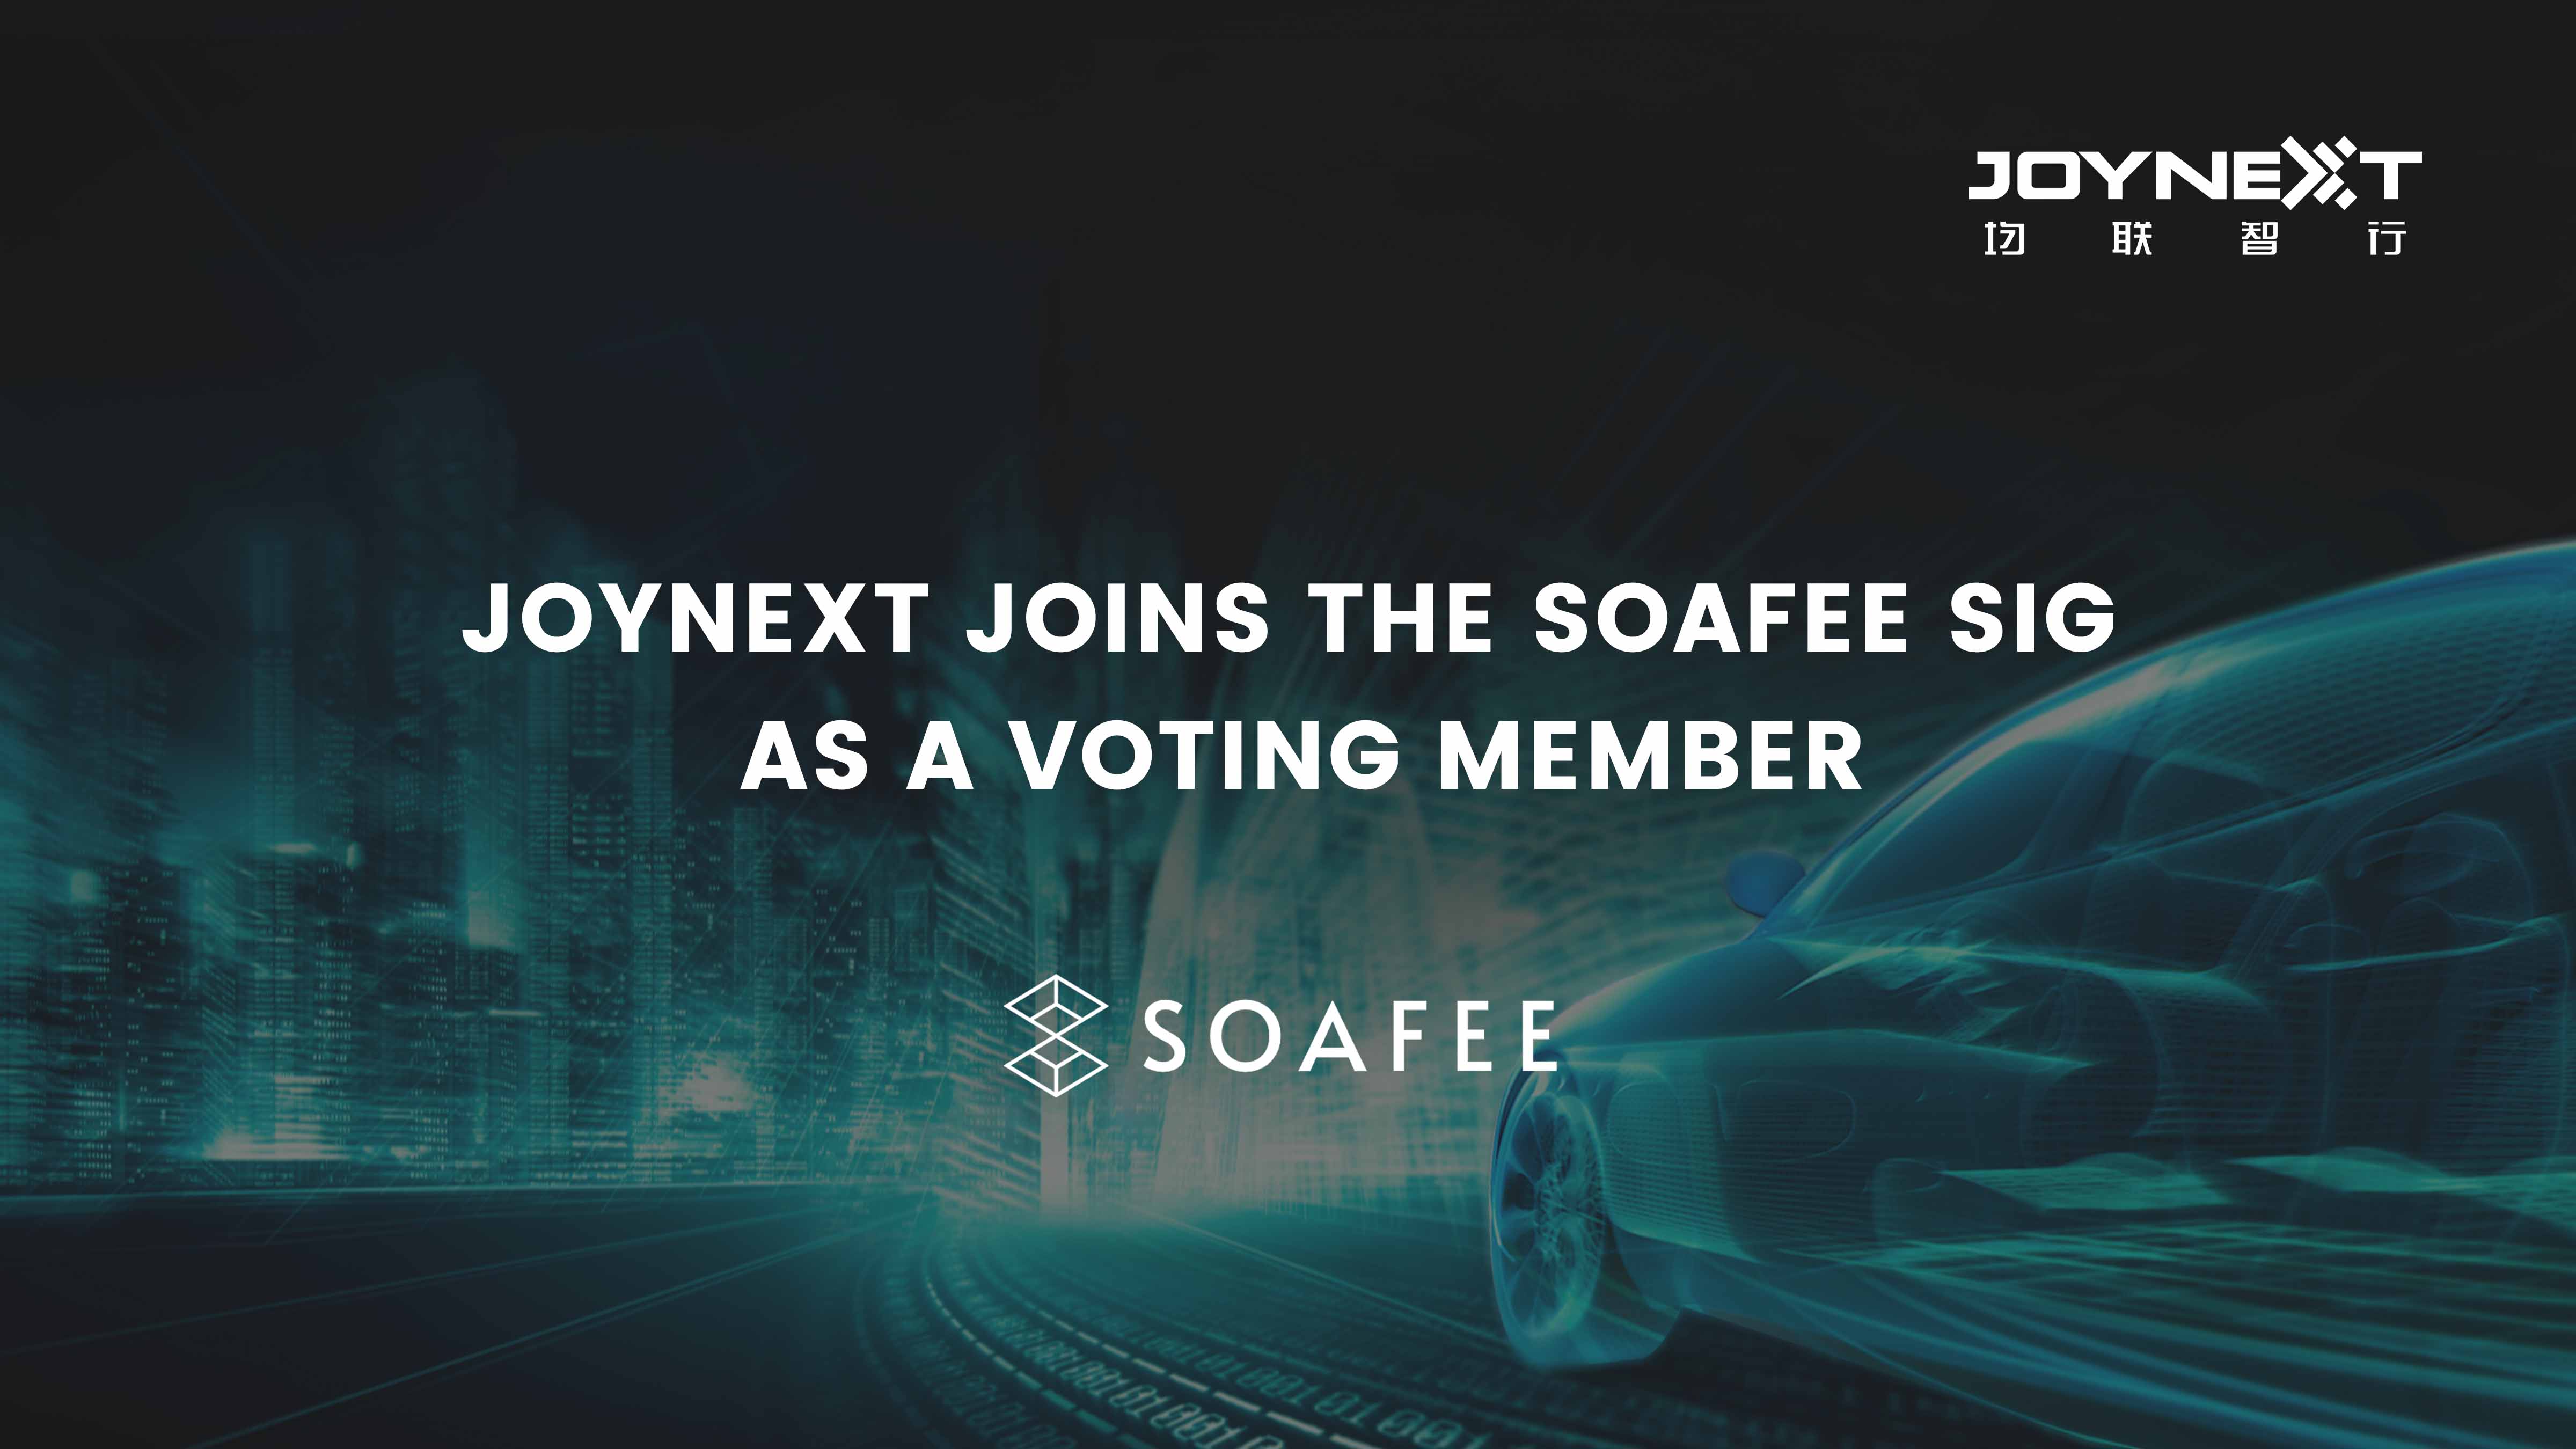 JOYNEXT Joins the SOAFEE SIG as a Voting Member